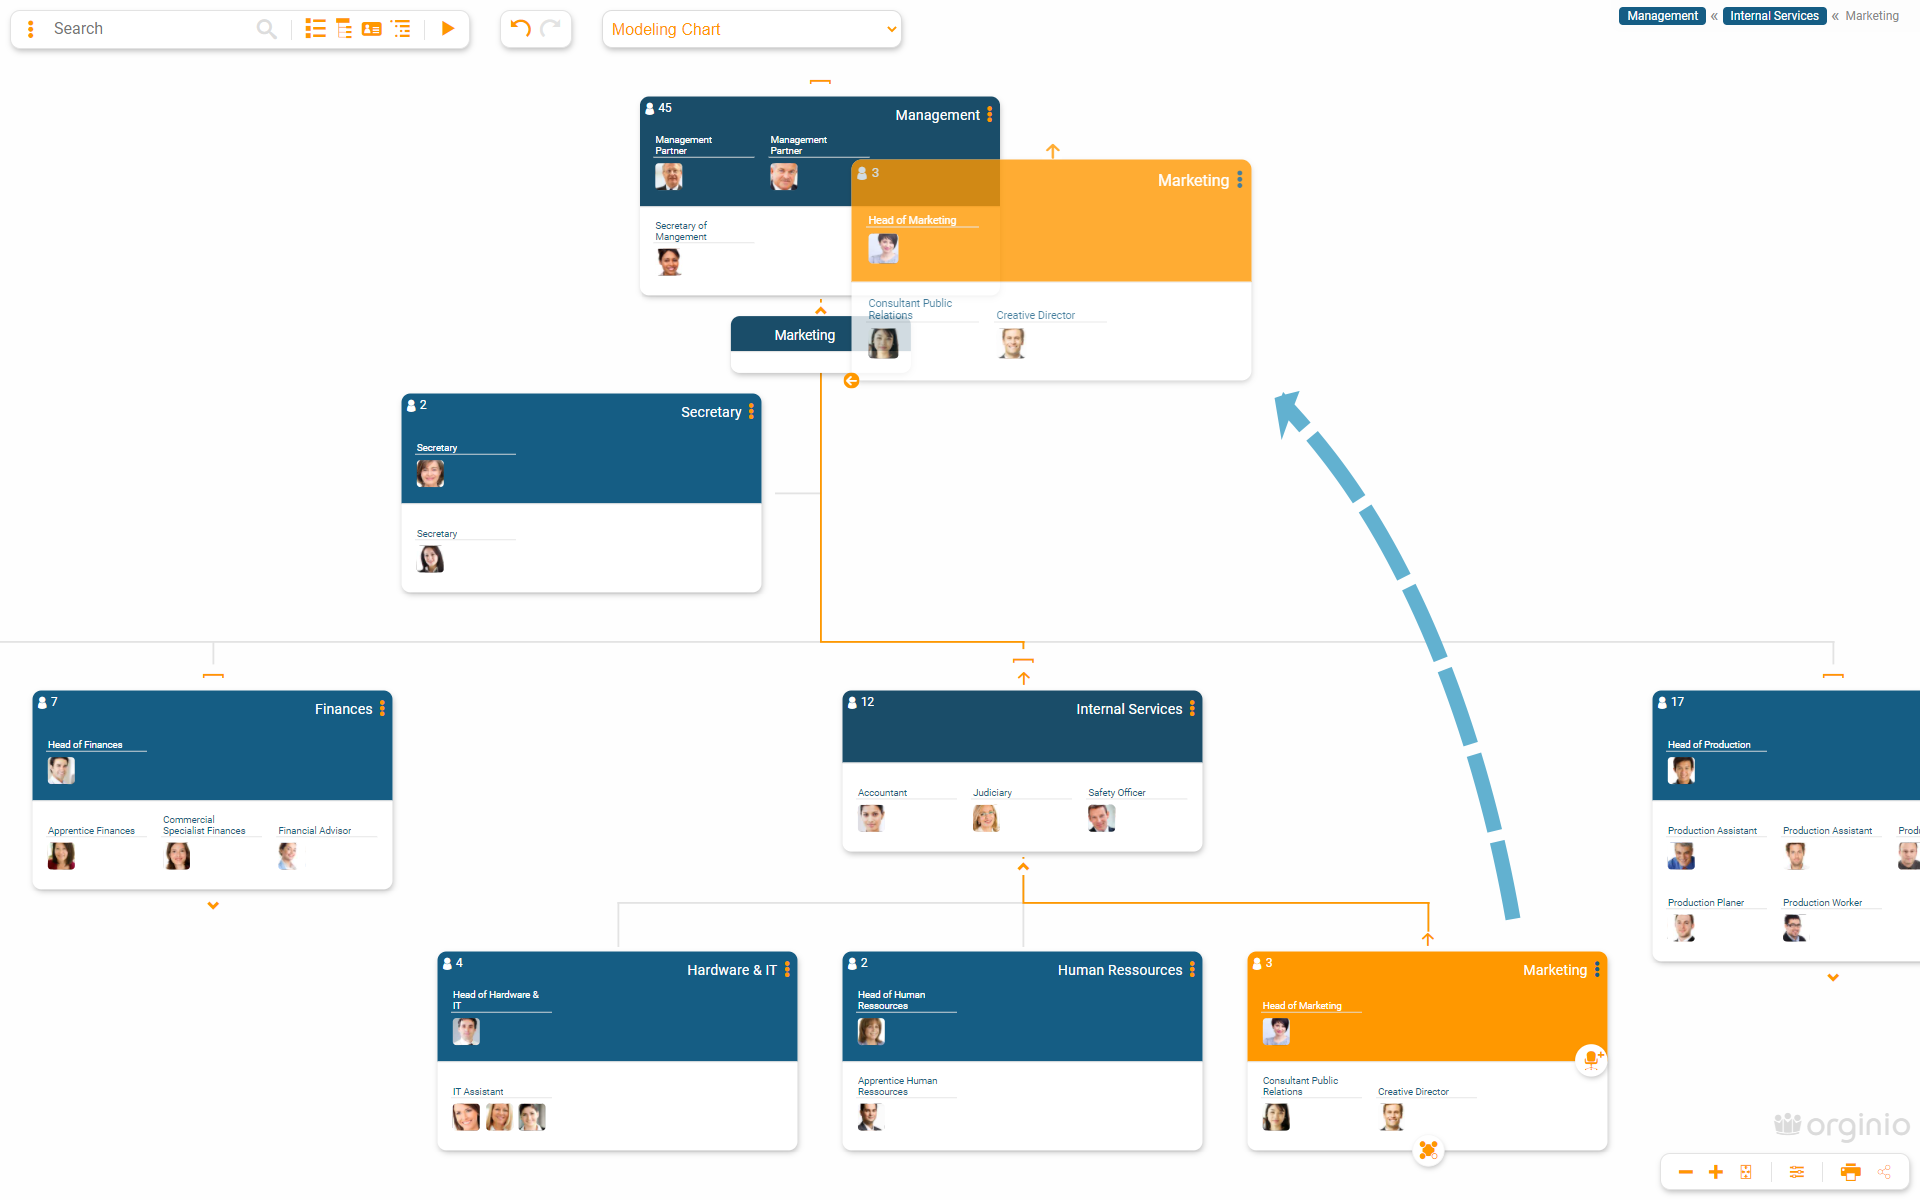 Perform modeling activities via drag-and-drop without changing the original org chart.